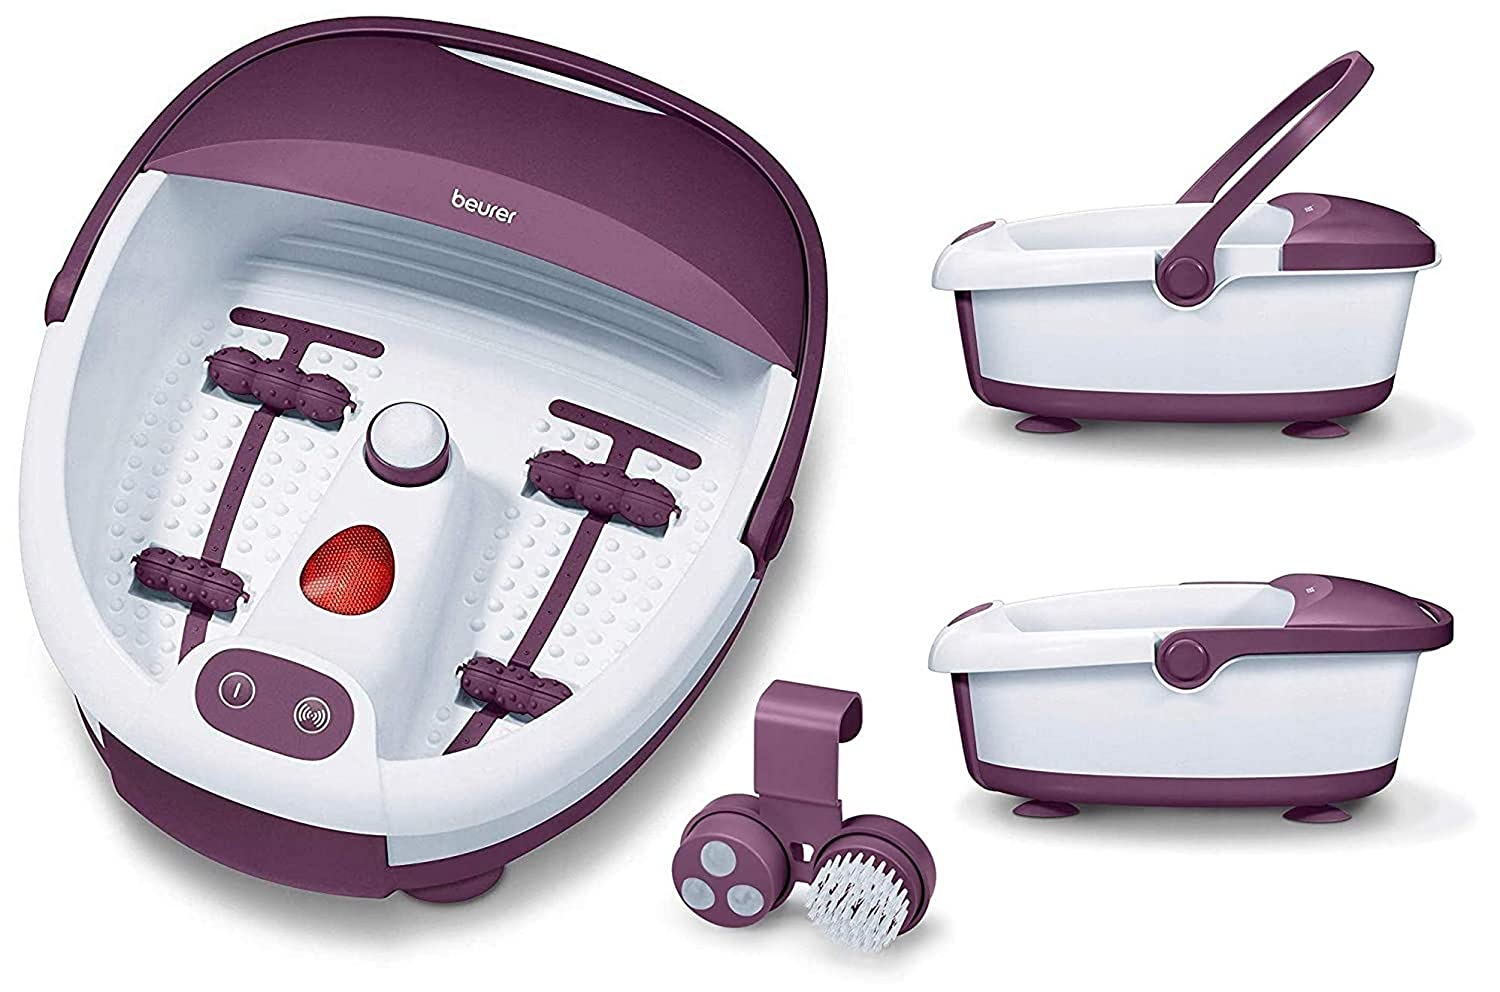 Beurer FB 21 foot spa for invigorated, well cared-for feet with 3 functions: vibration massage, bubble massage, water tempering,